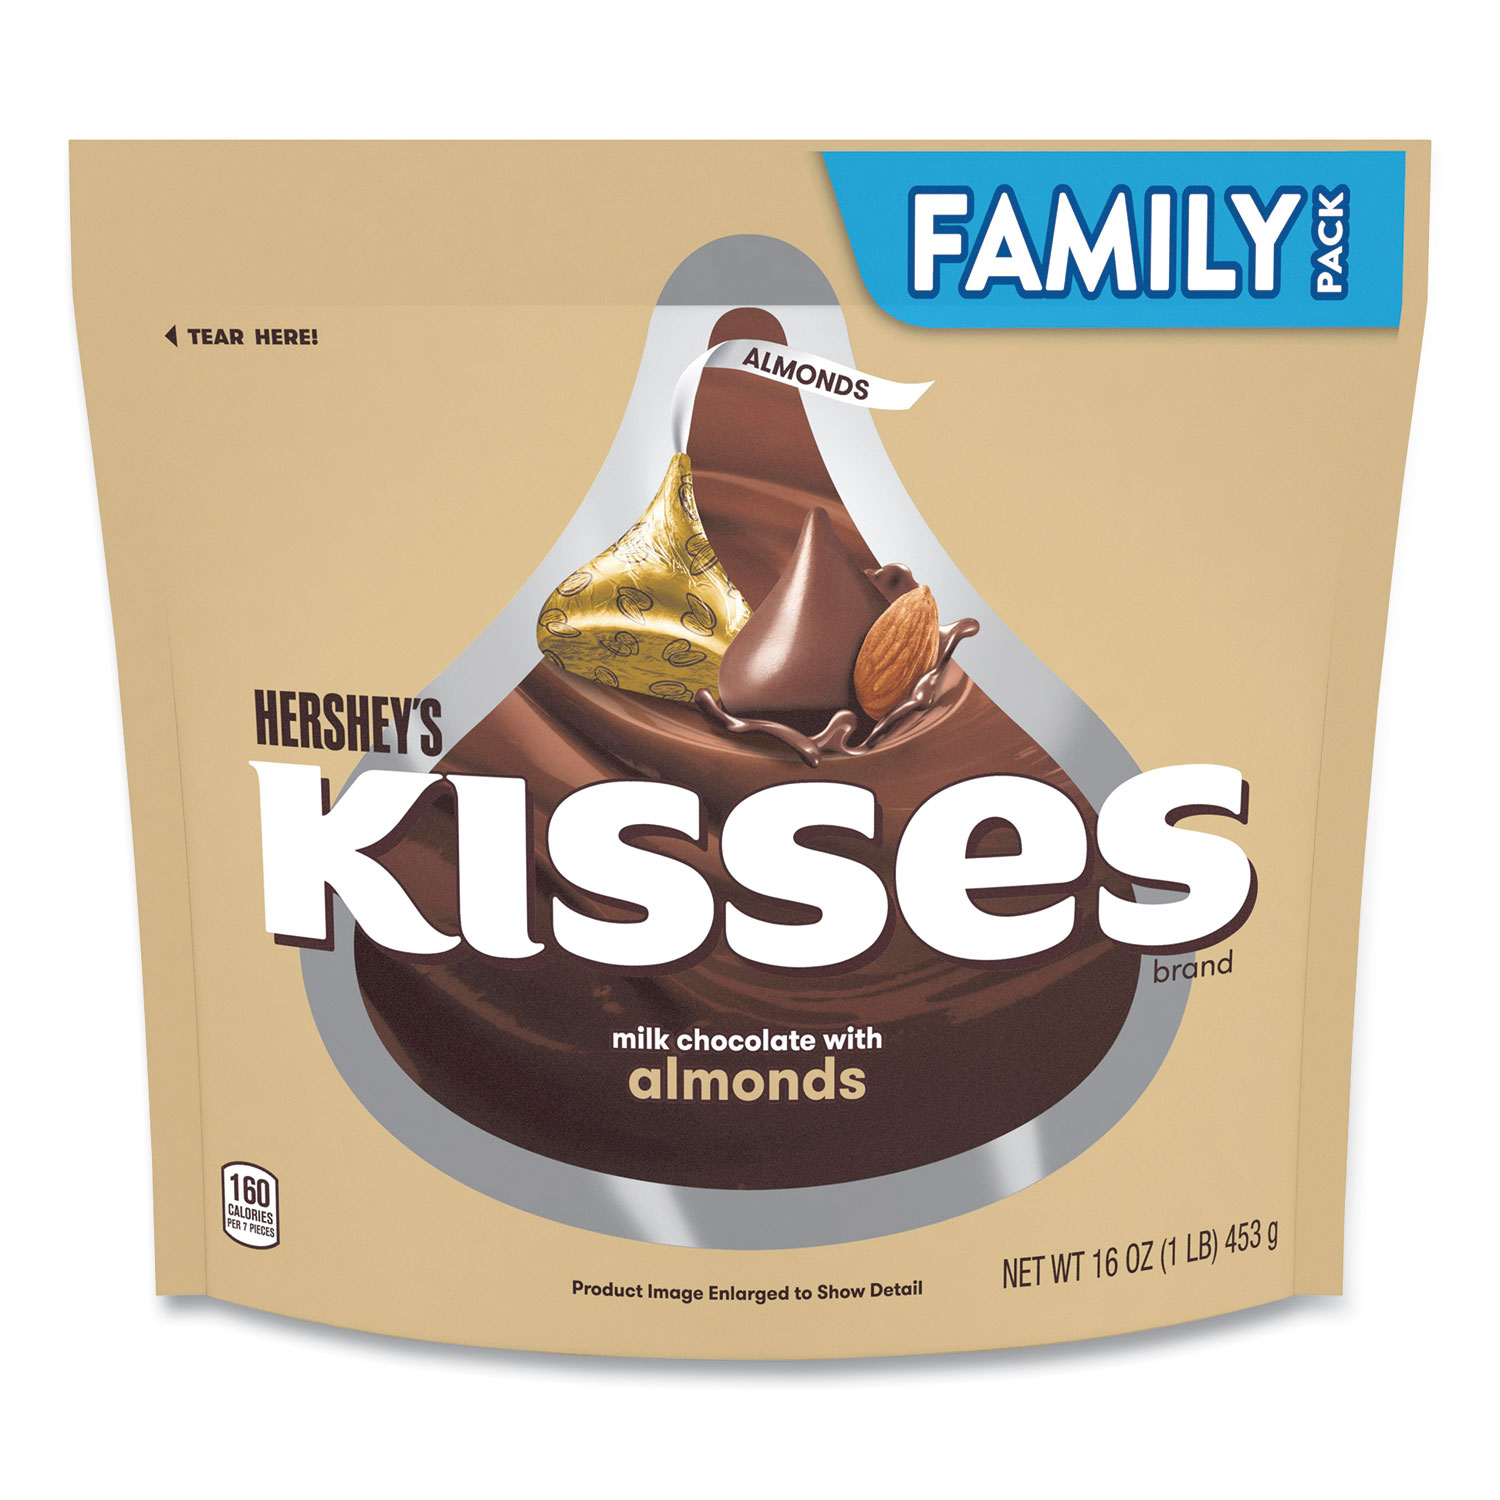  Hershey's 13379 KISSES Milk Chocolate with Almonds, Family Pack, 16 oz Bag, Free Delivery in 1-4 Business Days (GRR24600449) 